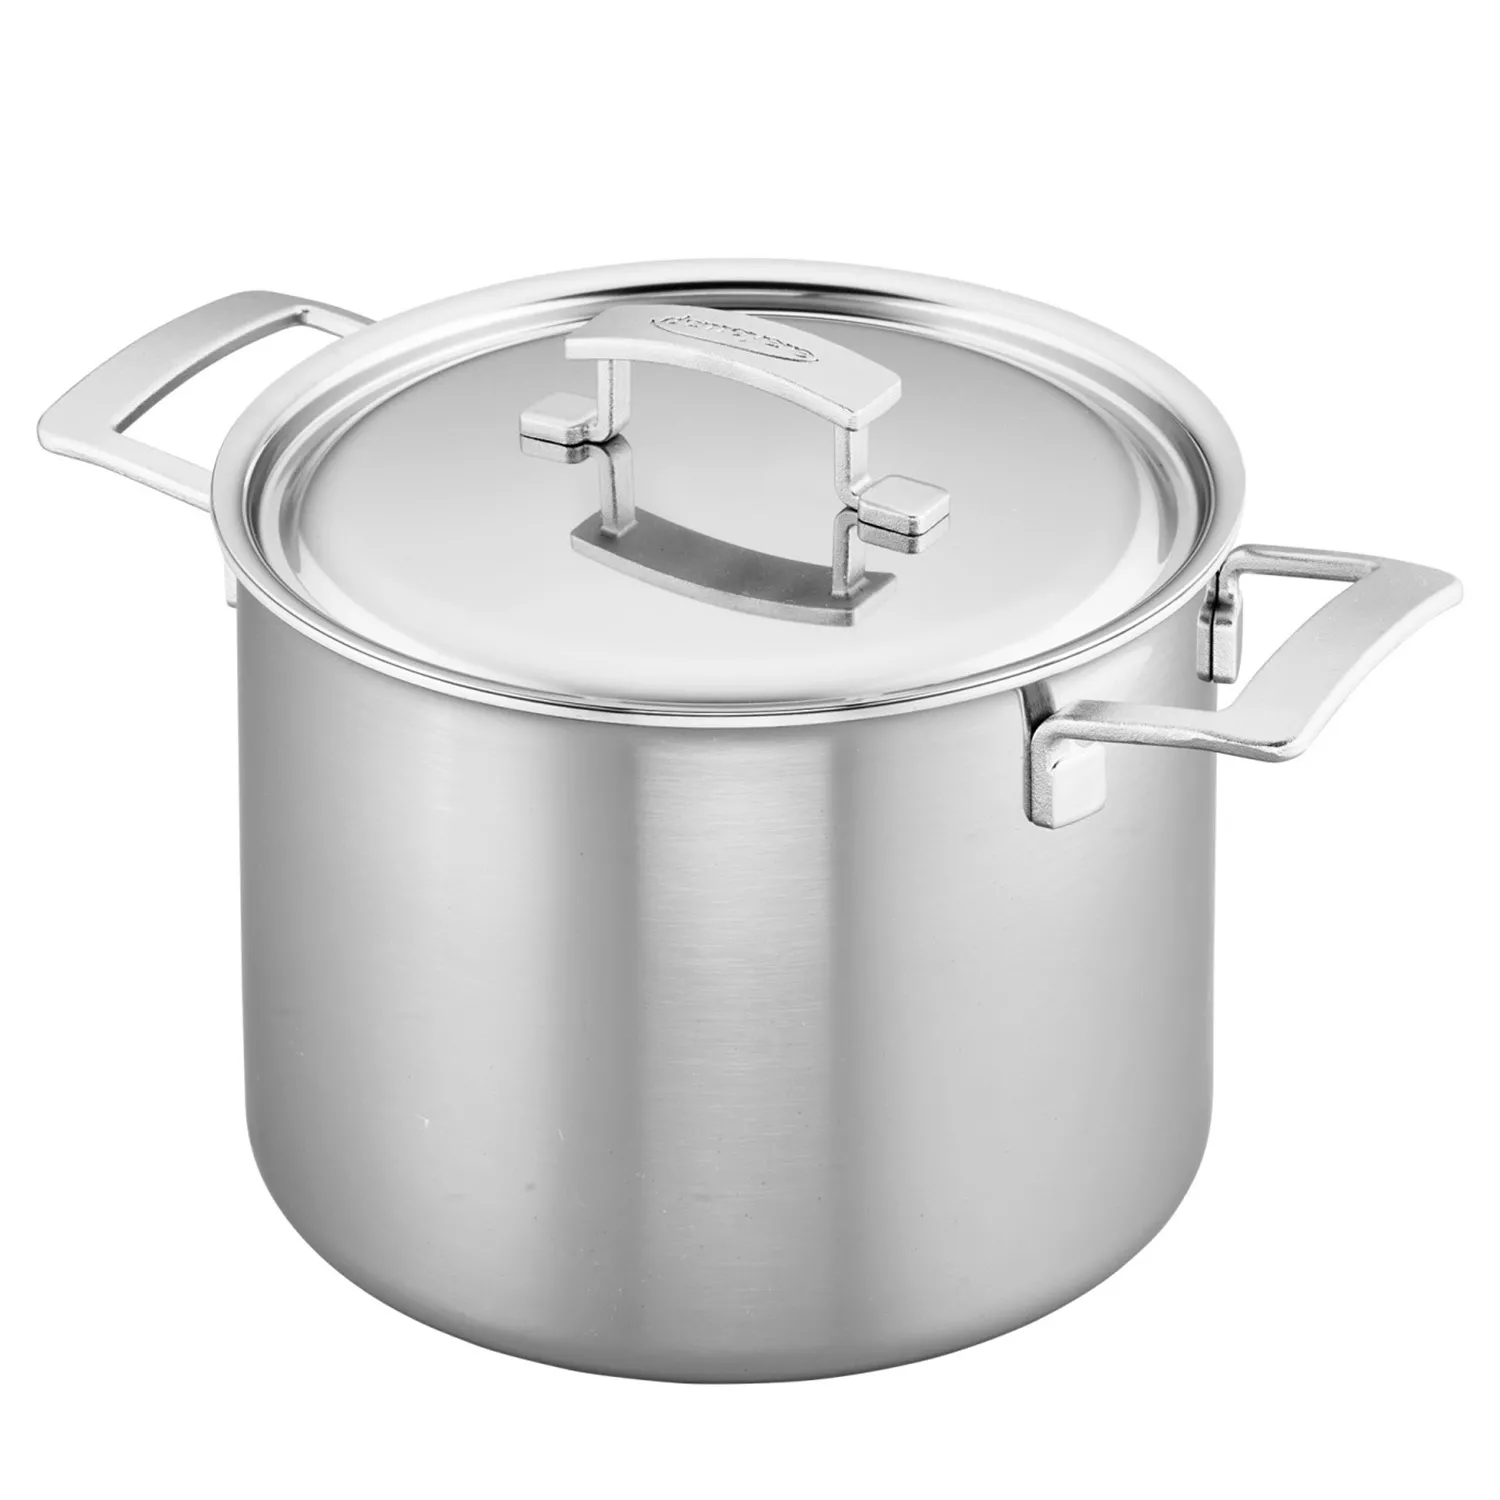 Le Creuset Signature Stainless Steel Stock Pot with Lid 24